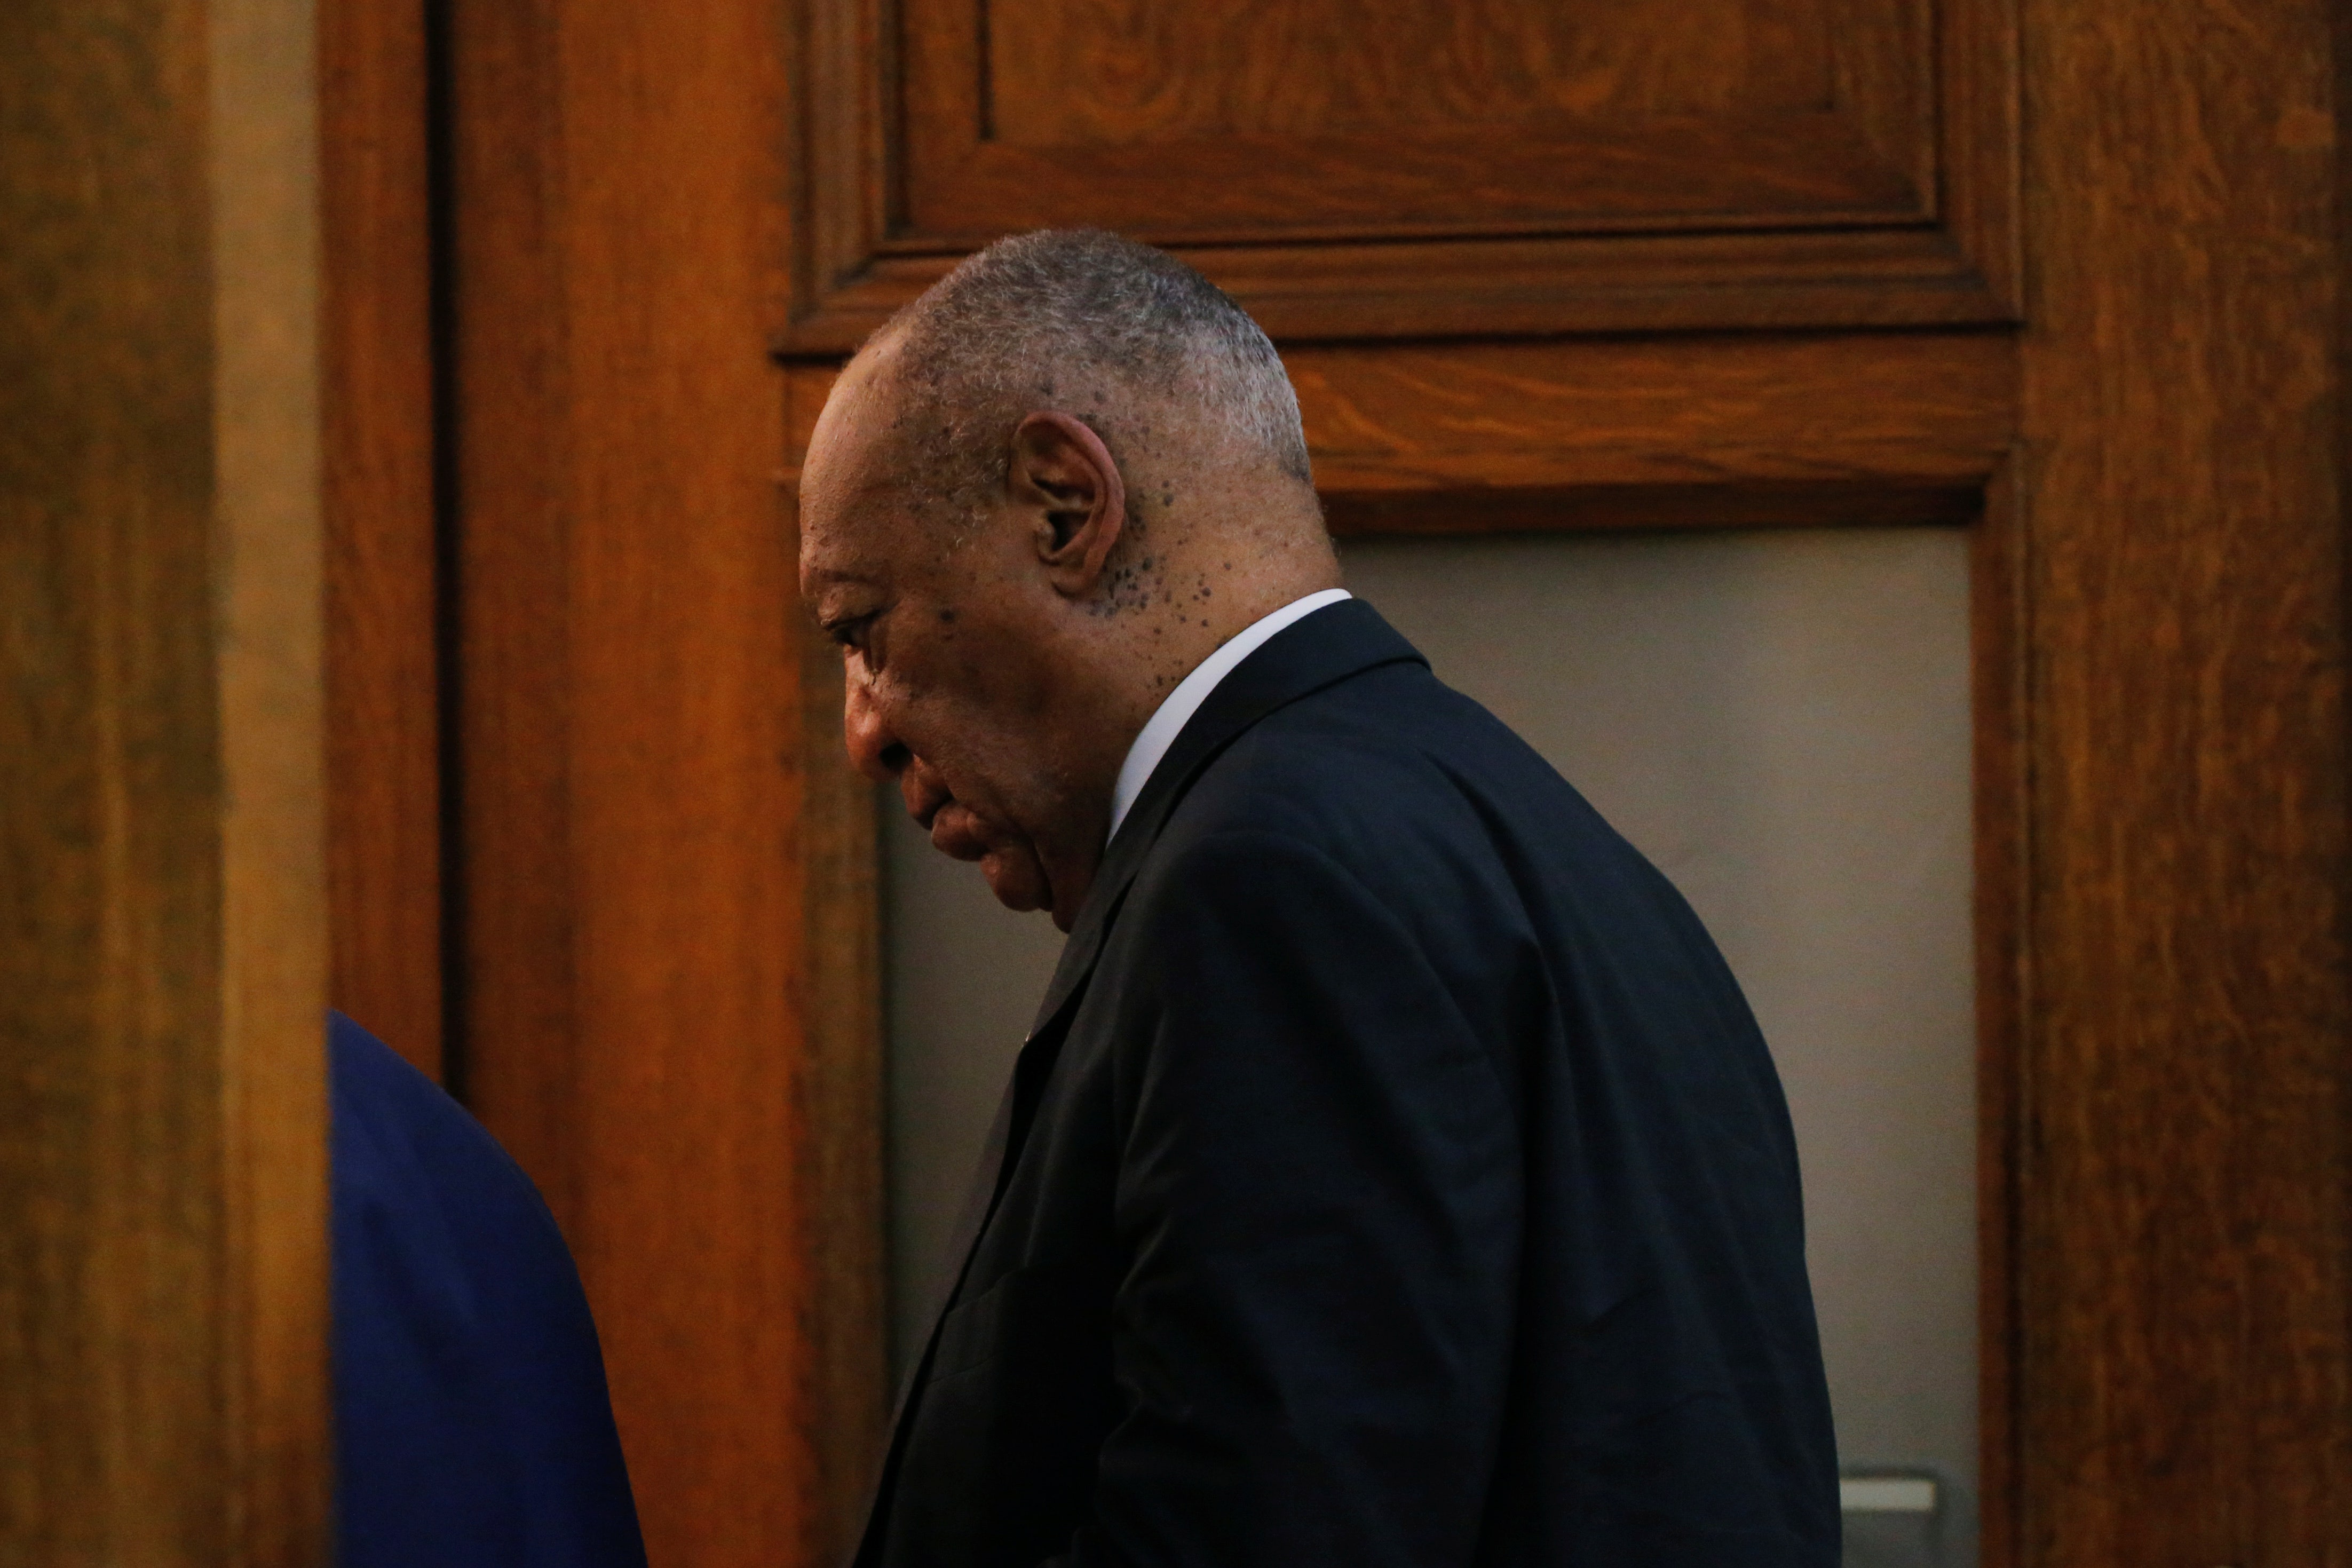 Bill Cosby civil trial jury will have to restart deliberations after nearly reaching verdict – World news